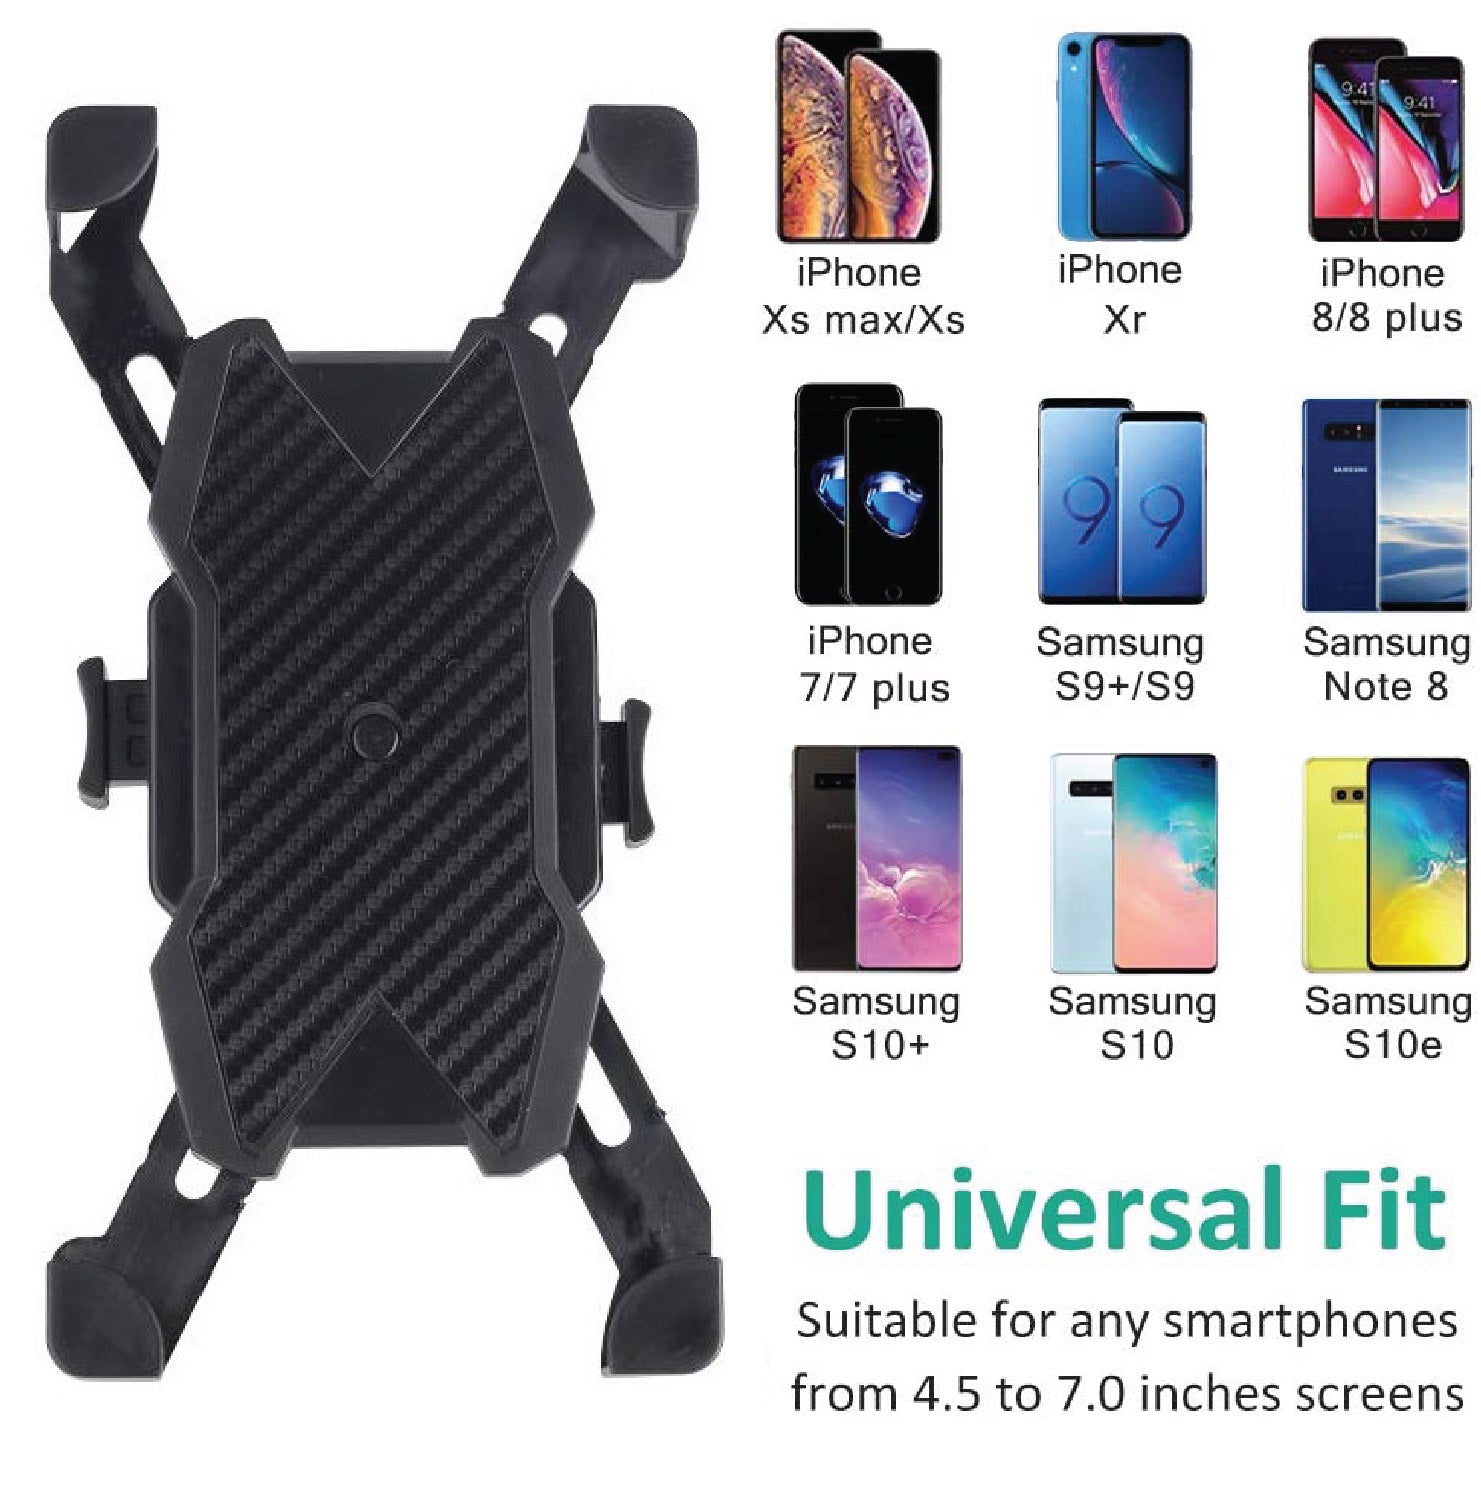 phone holder, phone case, scooter phone holder, plastic phone holder, cell phone holder, phone holder for electric scooter, portable phone holder, scooter phone attachment, easy to use phone holder, bike handlebar attachment, phone holder for handlebar